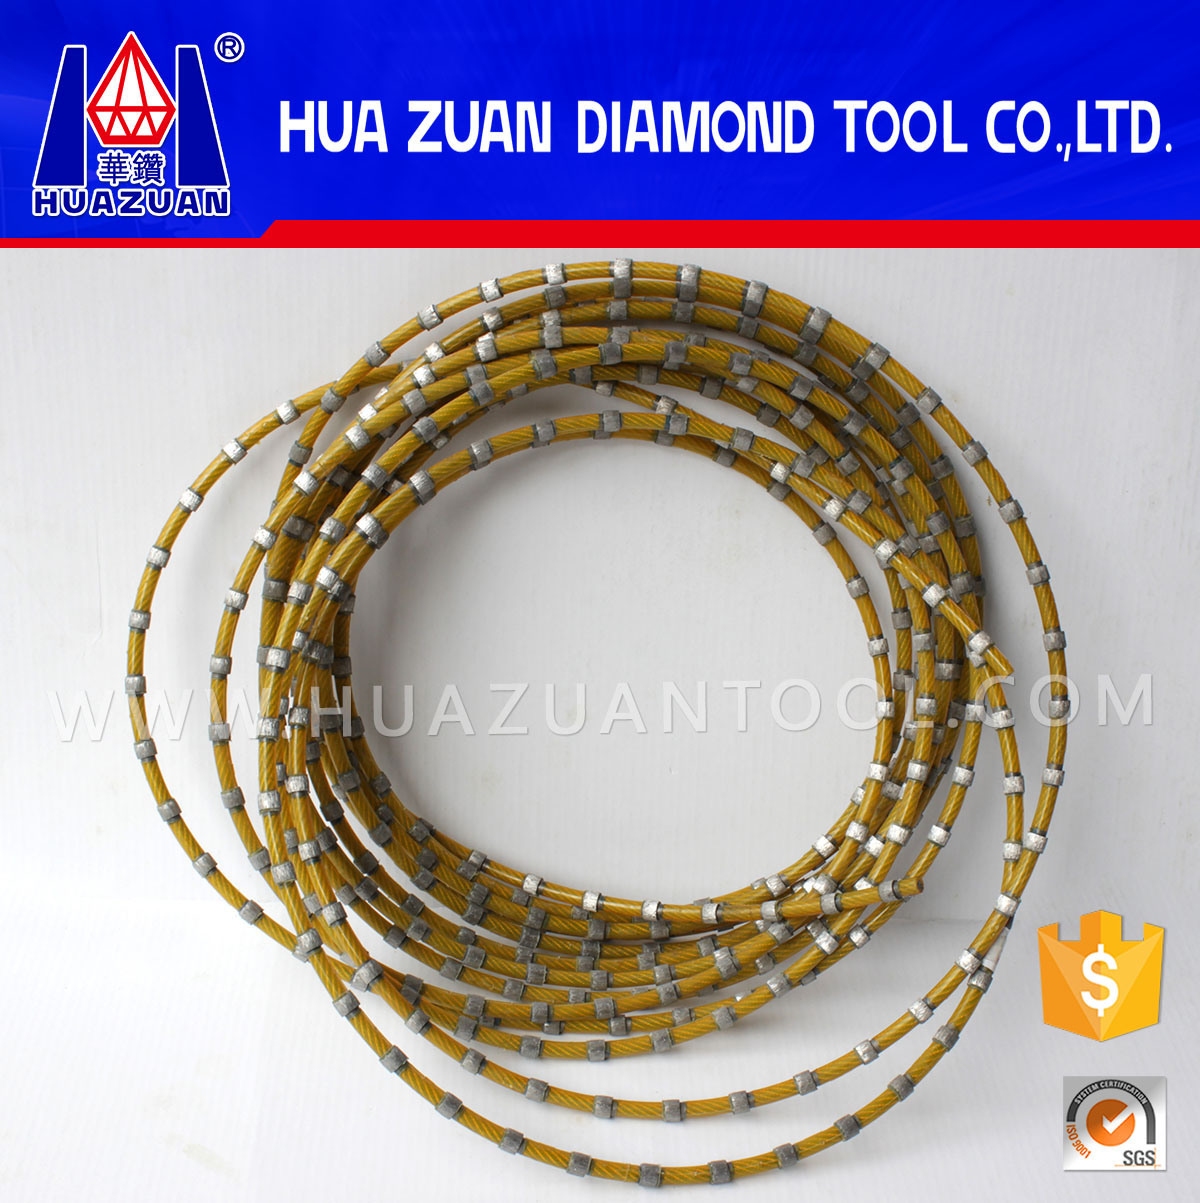 Diamond Wrie Saw for Marble Profiling